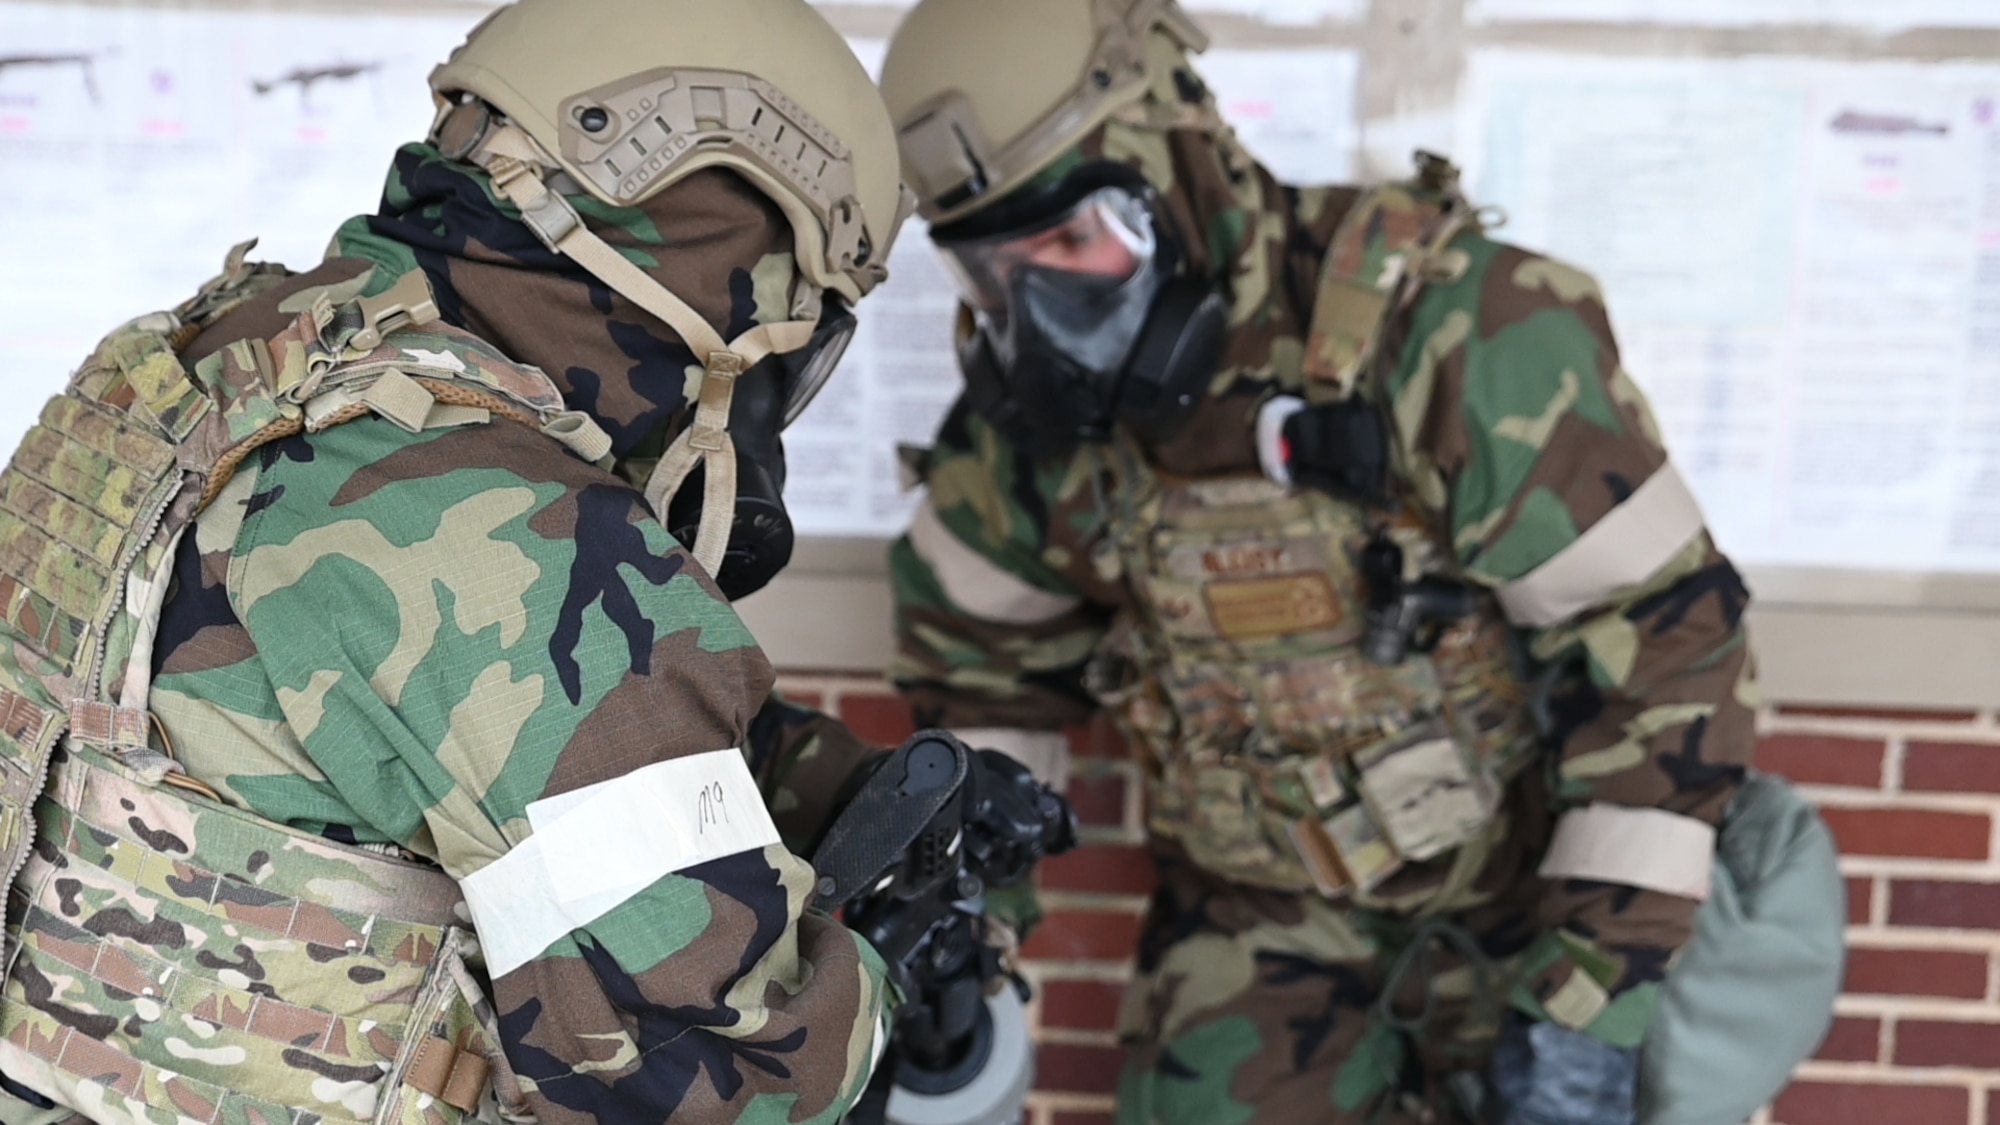 188th Security fForces squadron members inspect an M4 weapon while wearing gas masks.